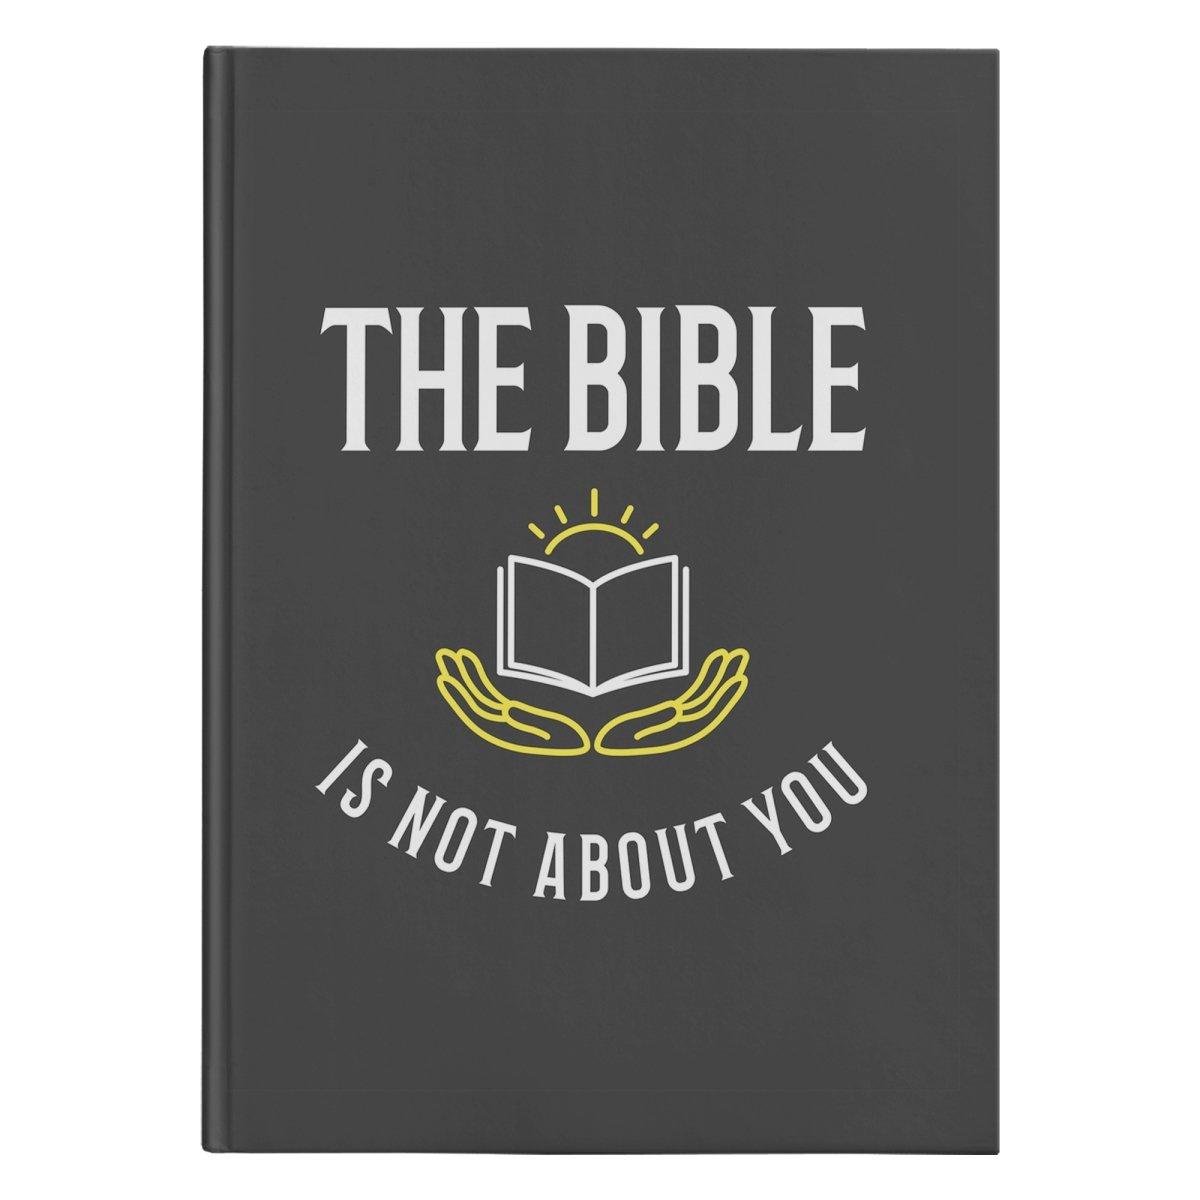 The Bible is not about you! (150 Page Hardcover Journal) - SDG Clothing